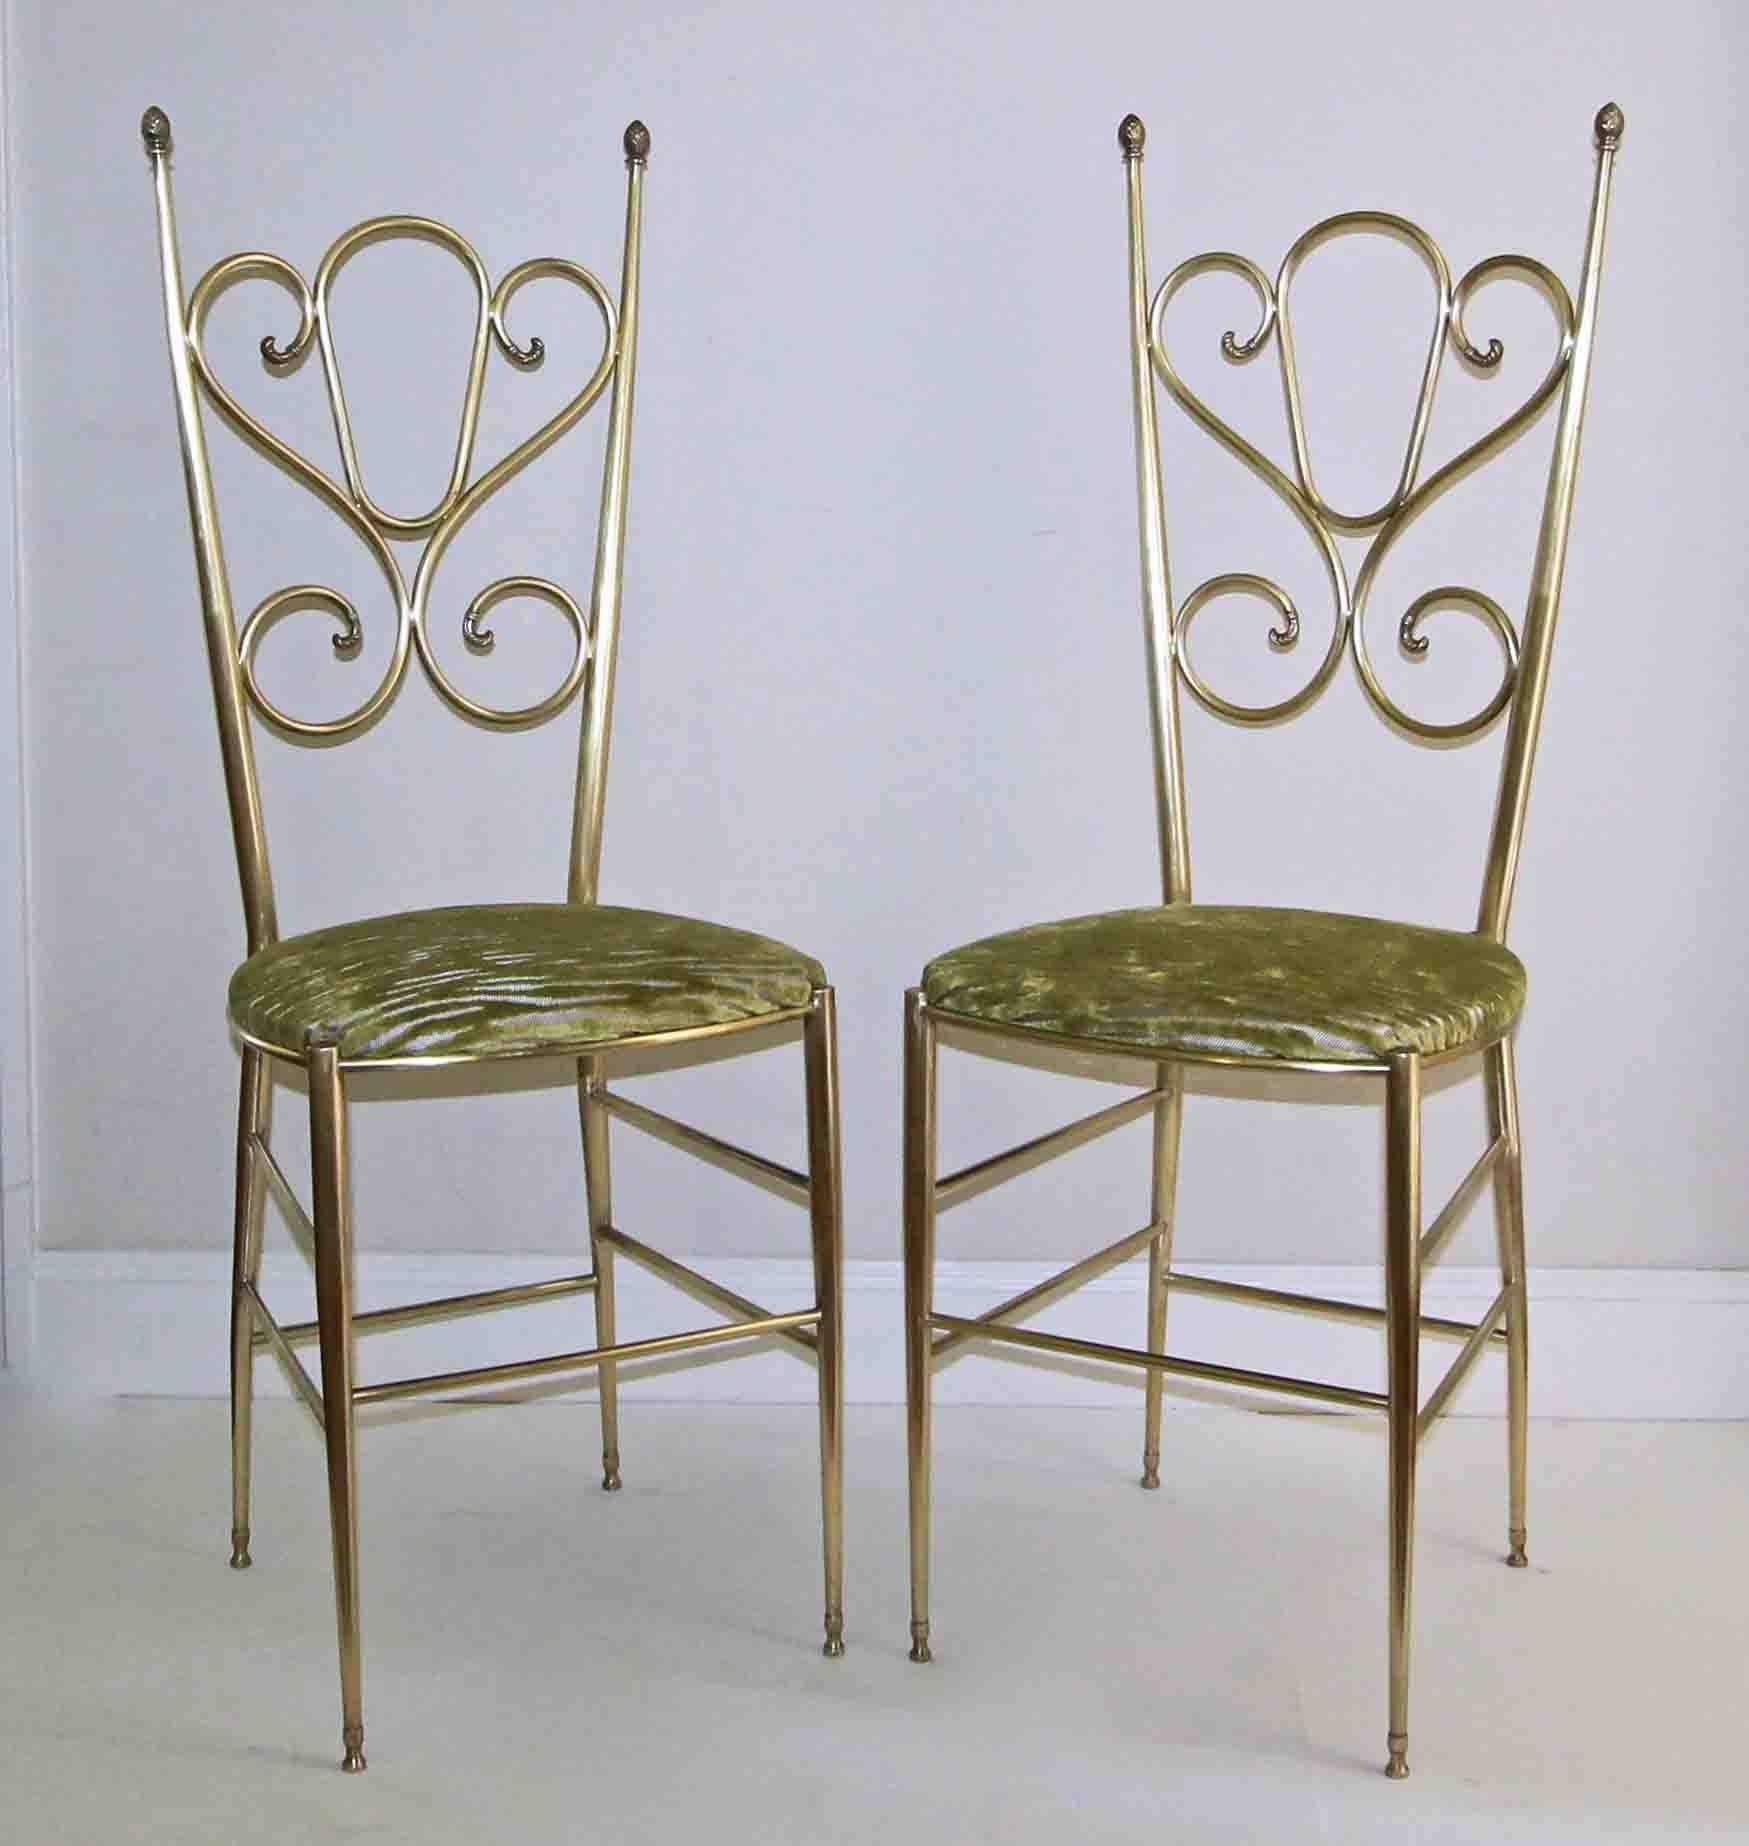 Pair of brass Italian tall back side chairs with scrolling back and pineapple finial details. Slip seats are covered in a new high end green cut velvet. Tubular brass construction. Attributed to Chiavari. 